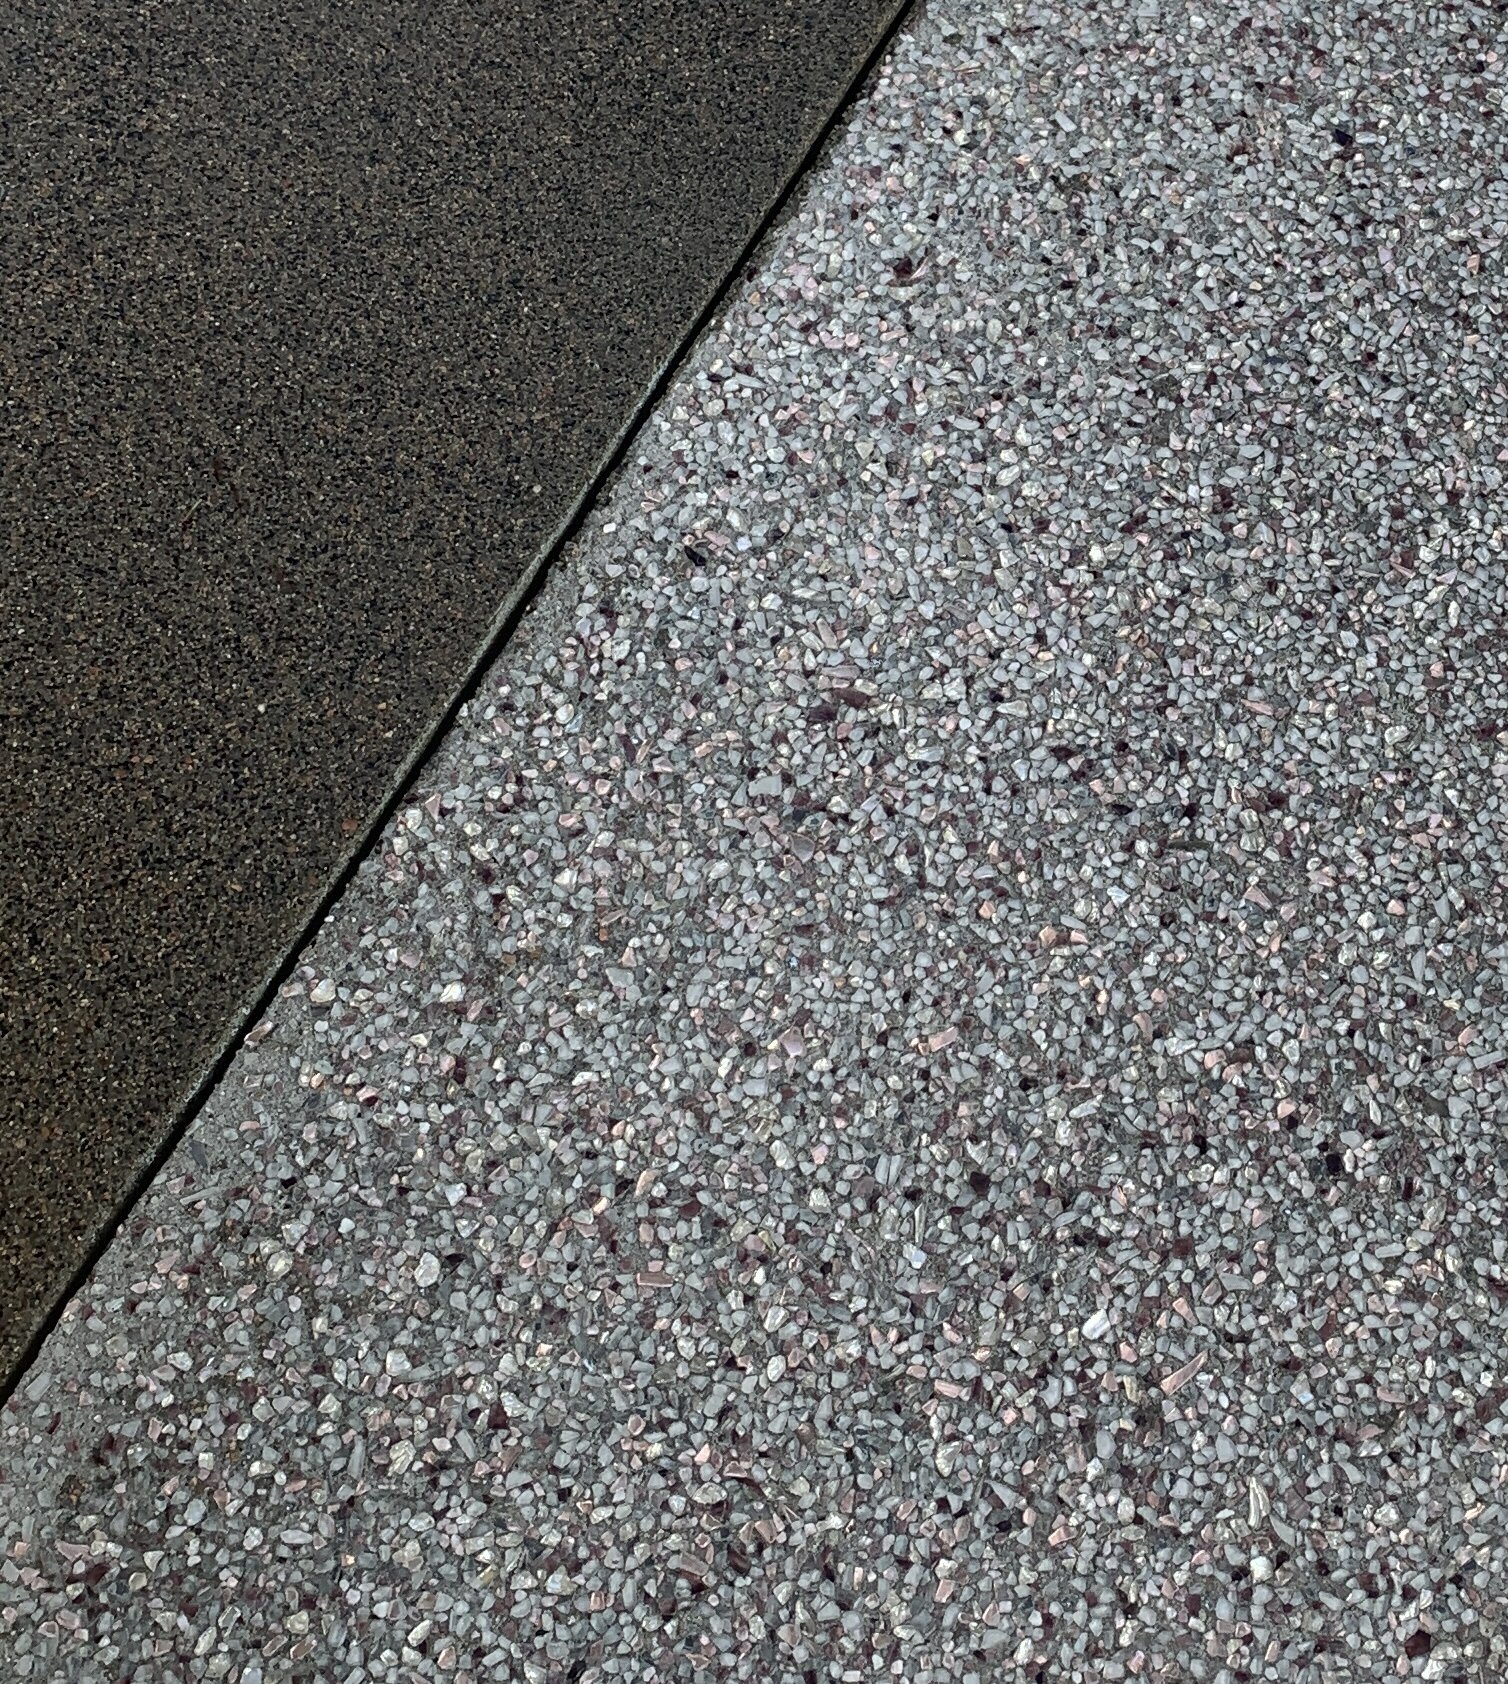 Decorative seeded exposed aggregate